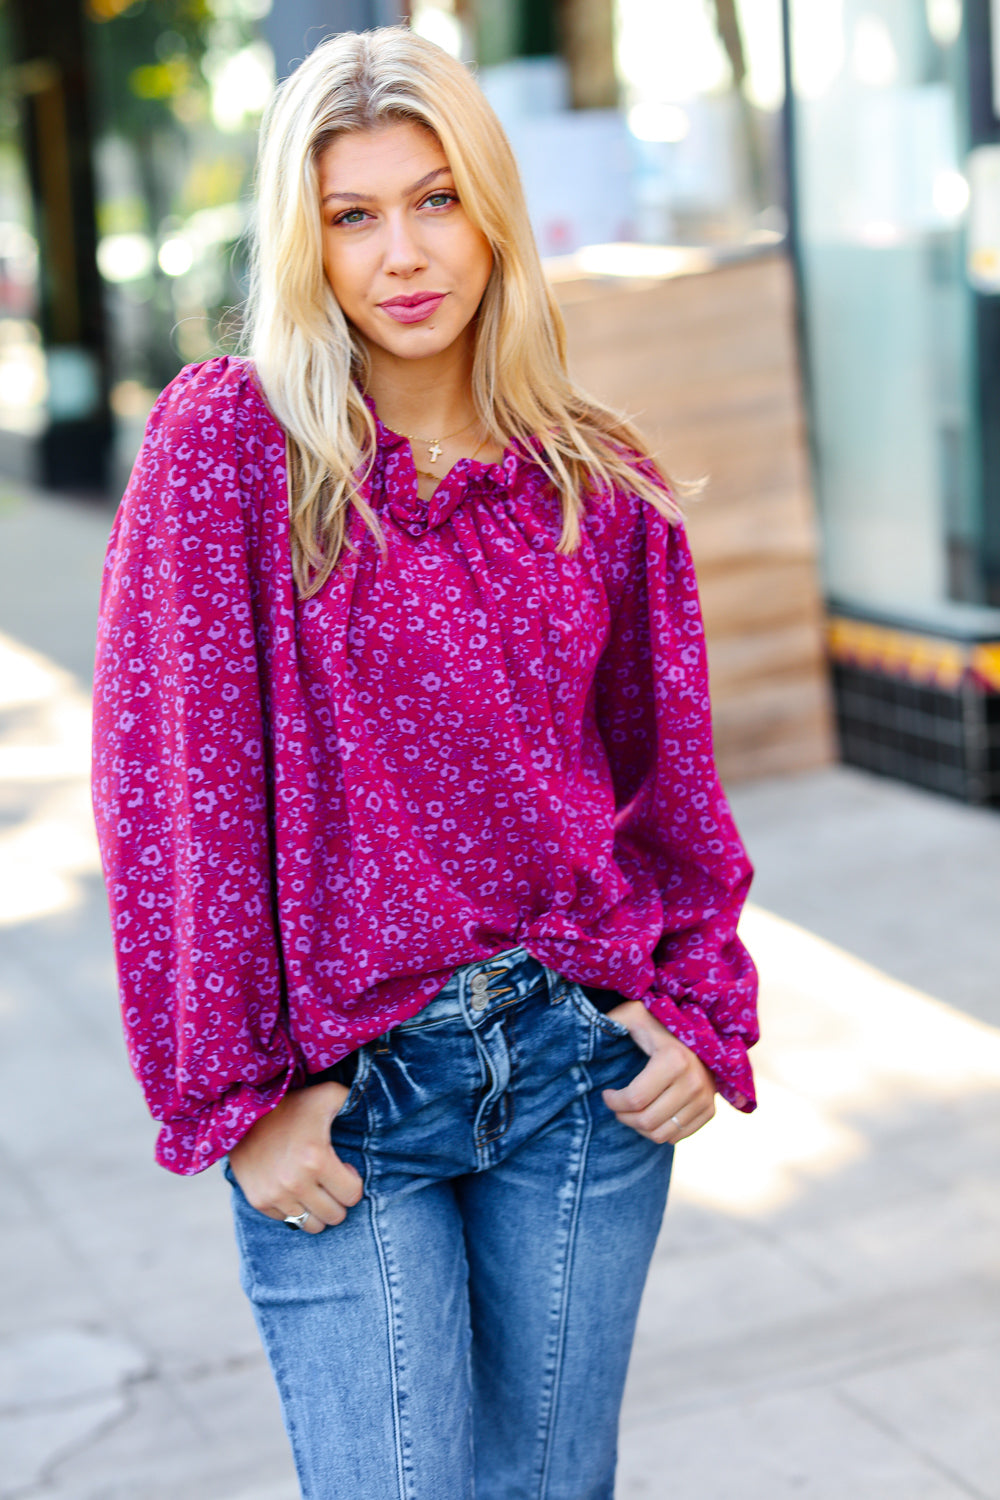 If You Dare Floral Top